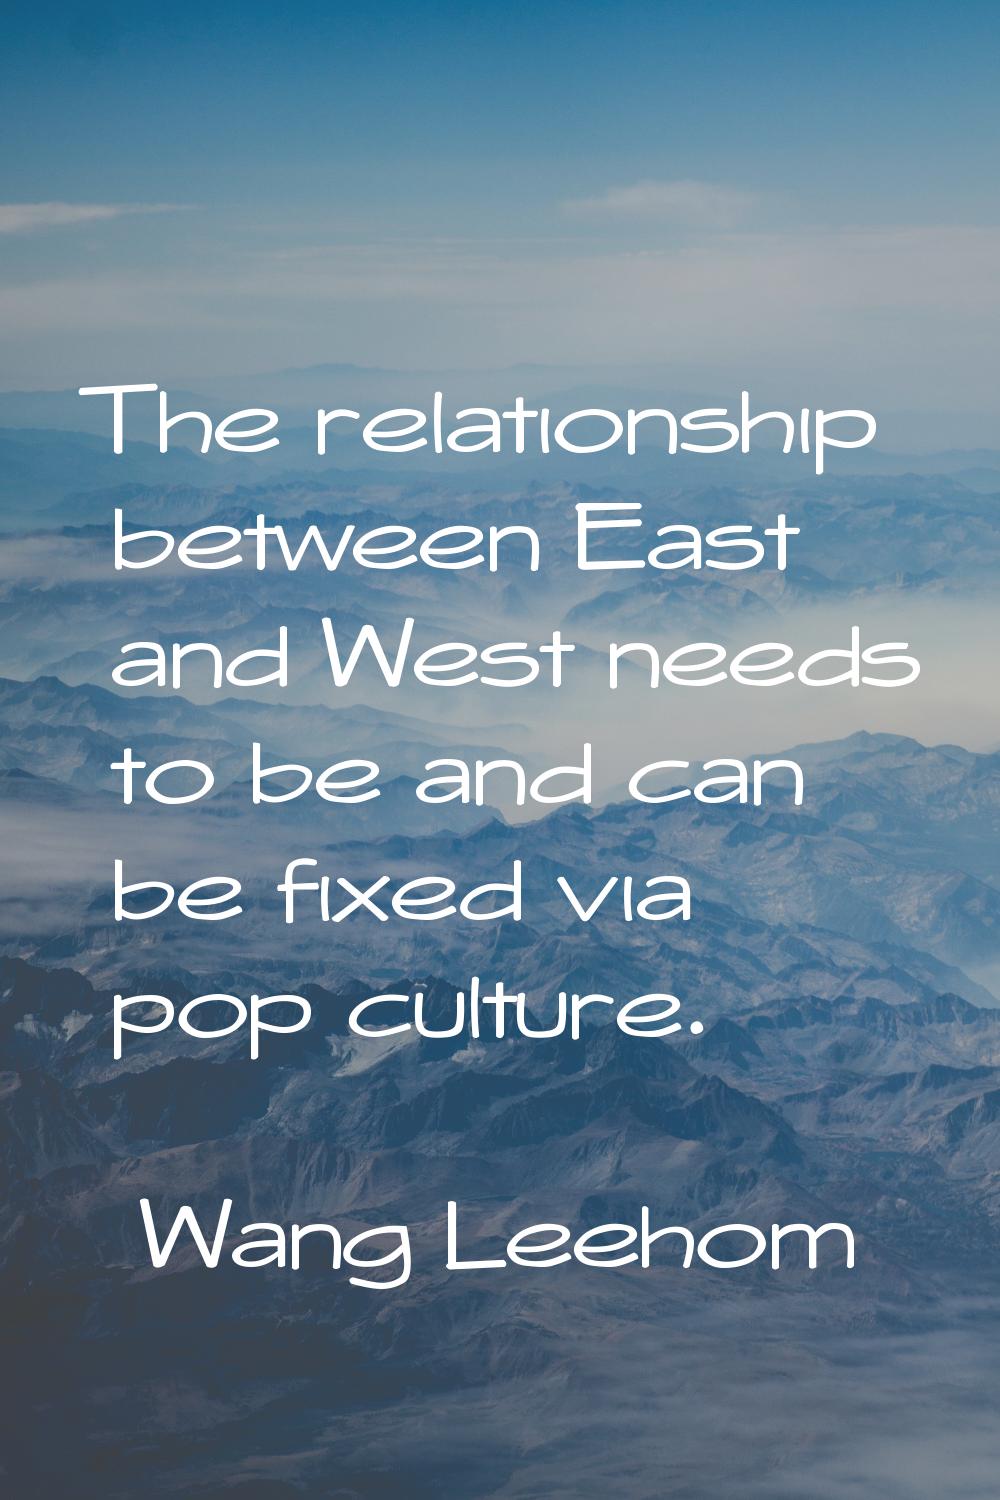 The relationship between East and West needs to be and can be fixed via pop culture.